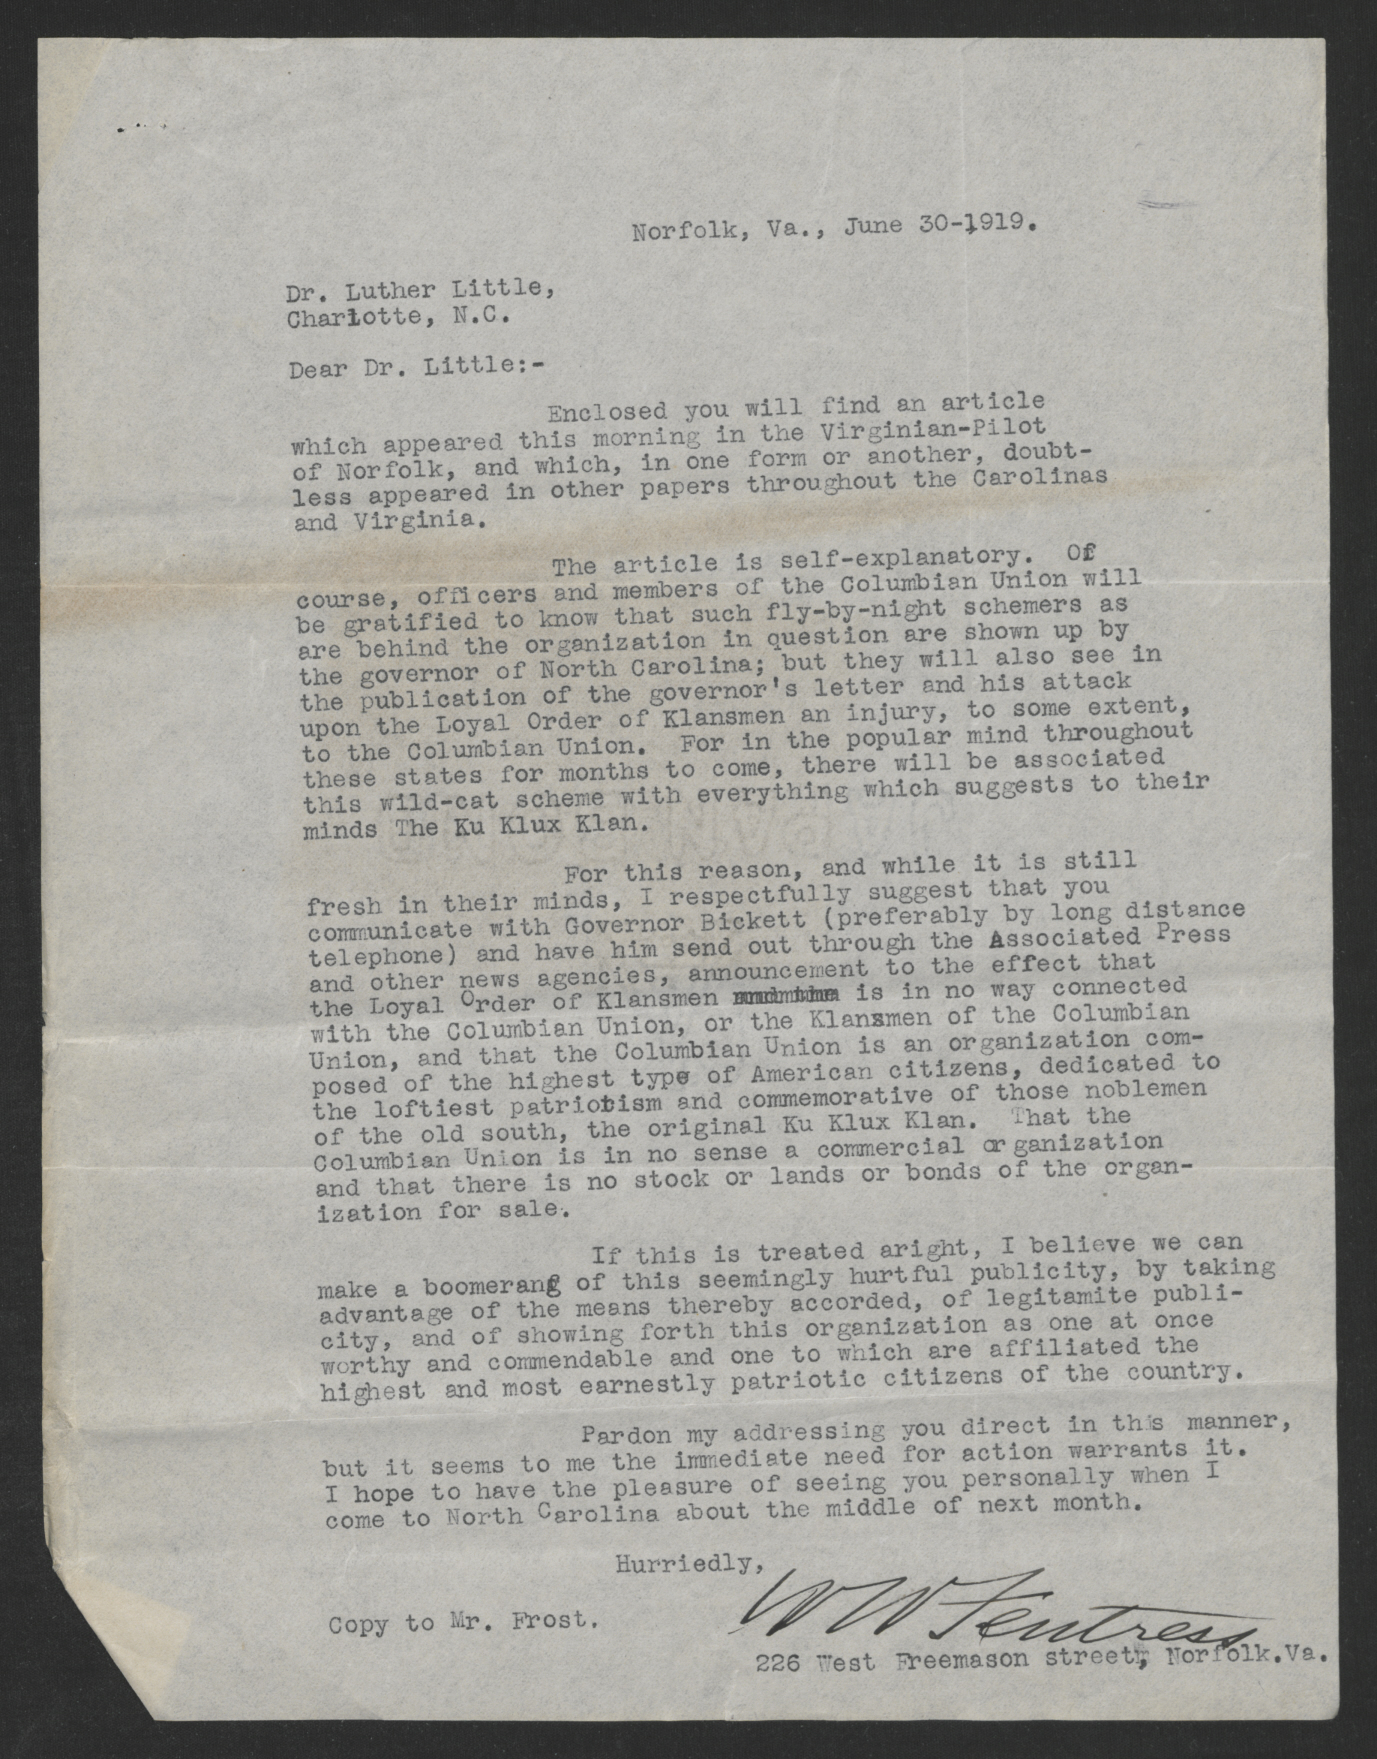 Letter from W. W. Fentress to Luther Little, June 30, 1919